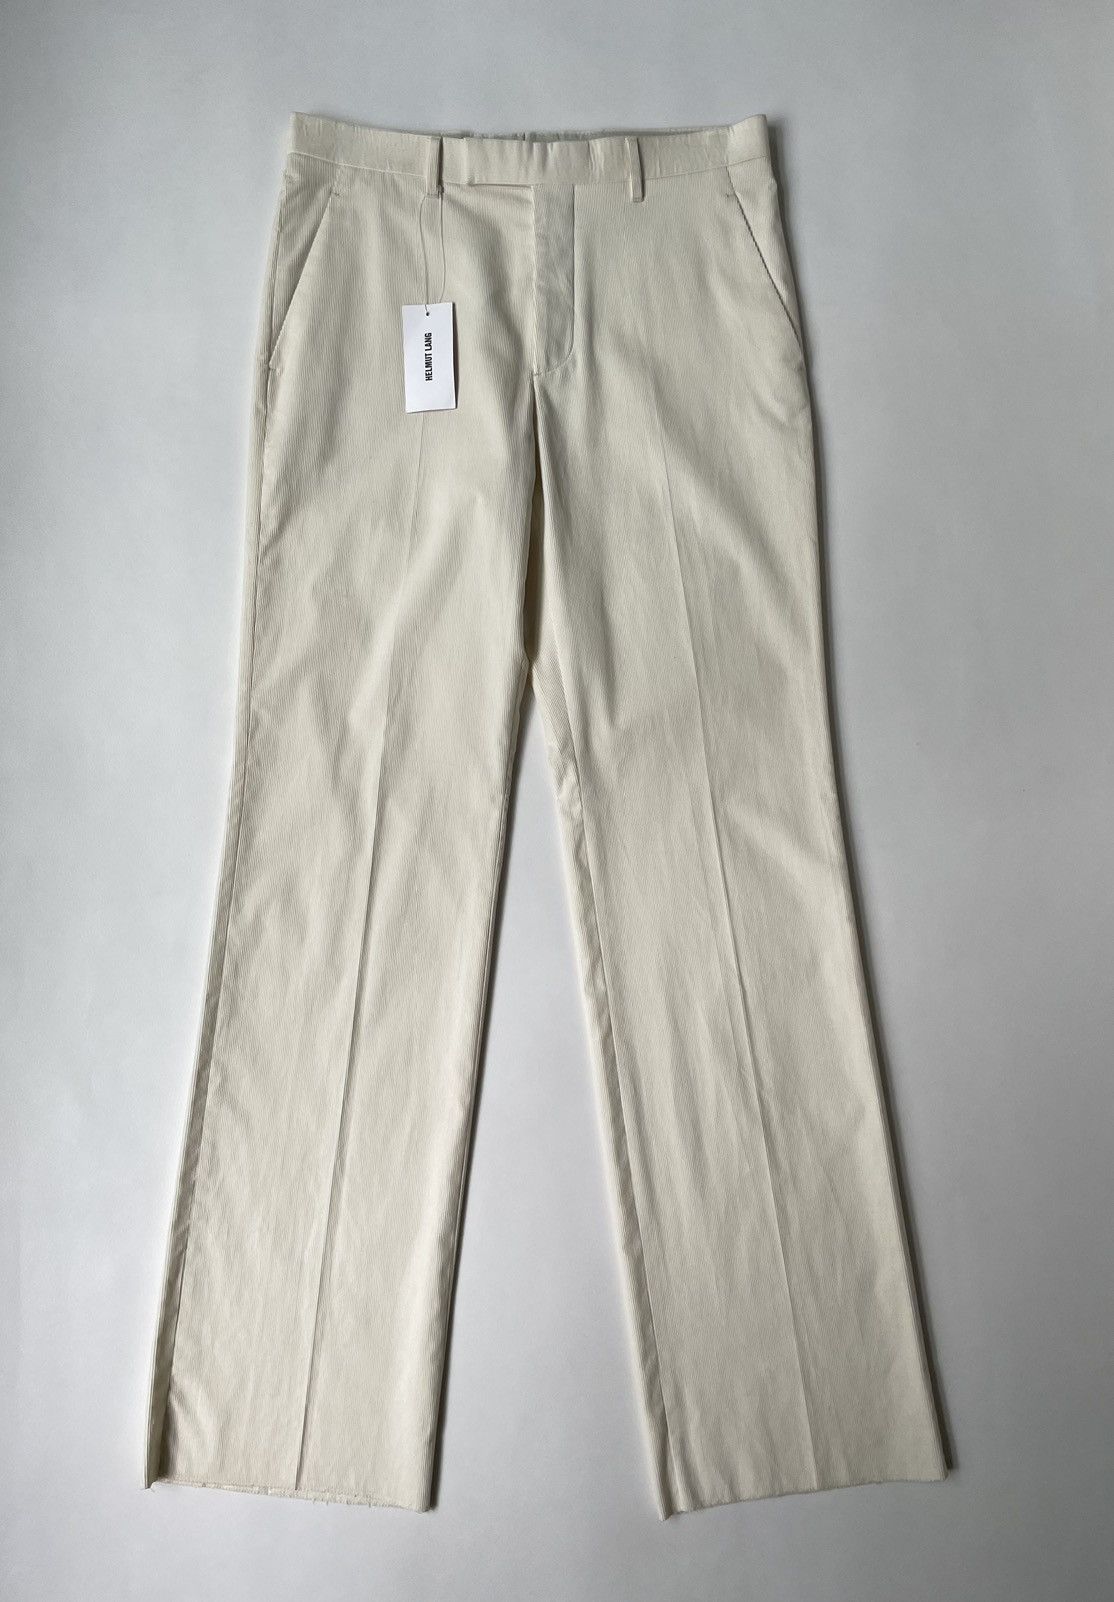 Helmut Lang Early 2000s Cord Trousers | Grailed